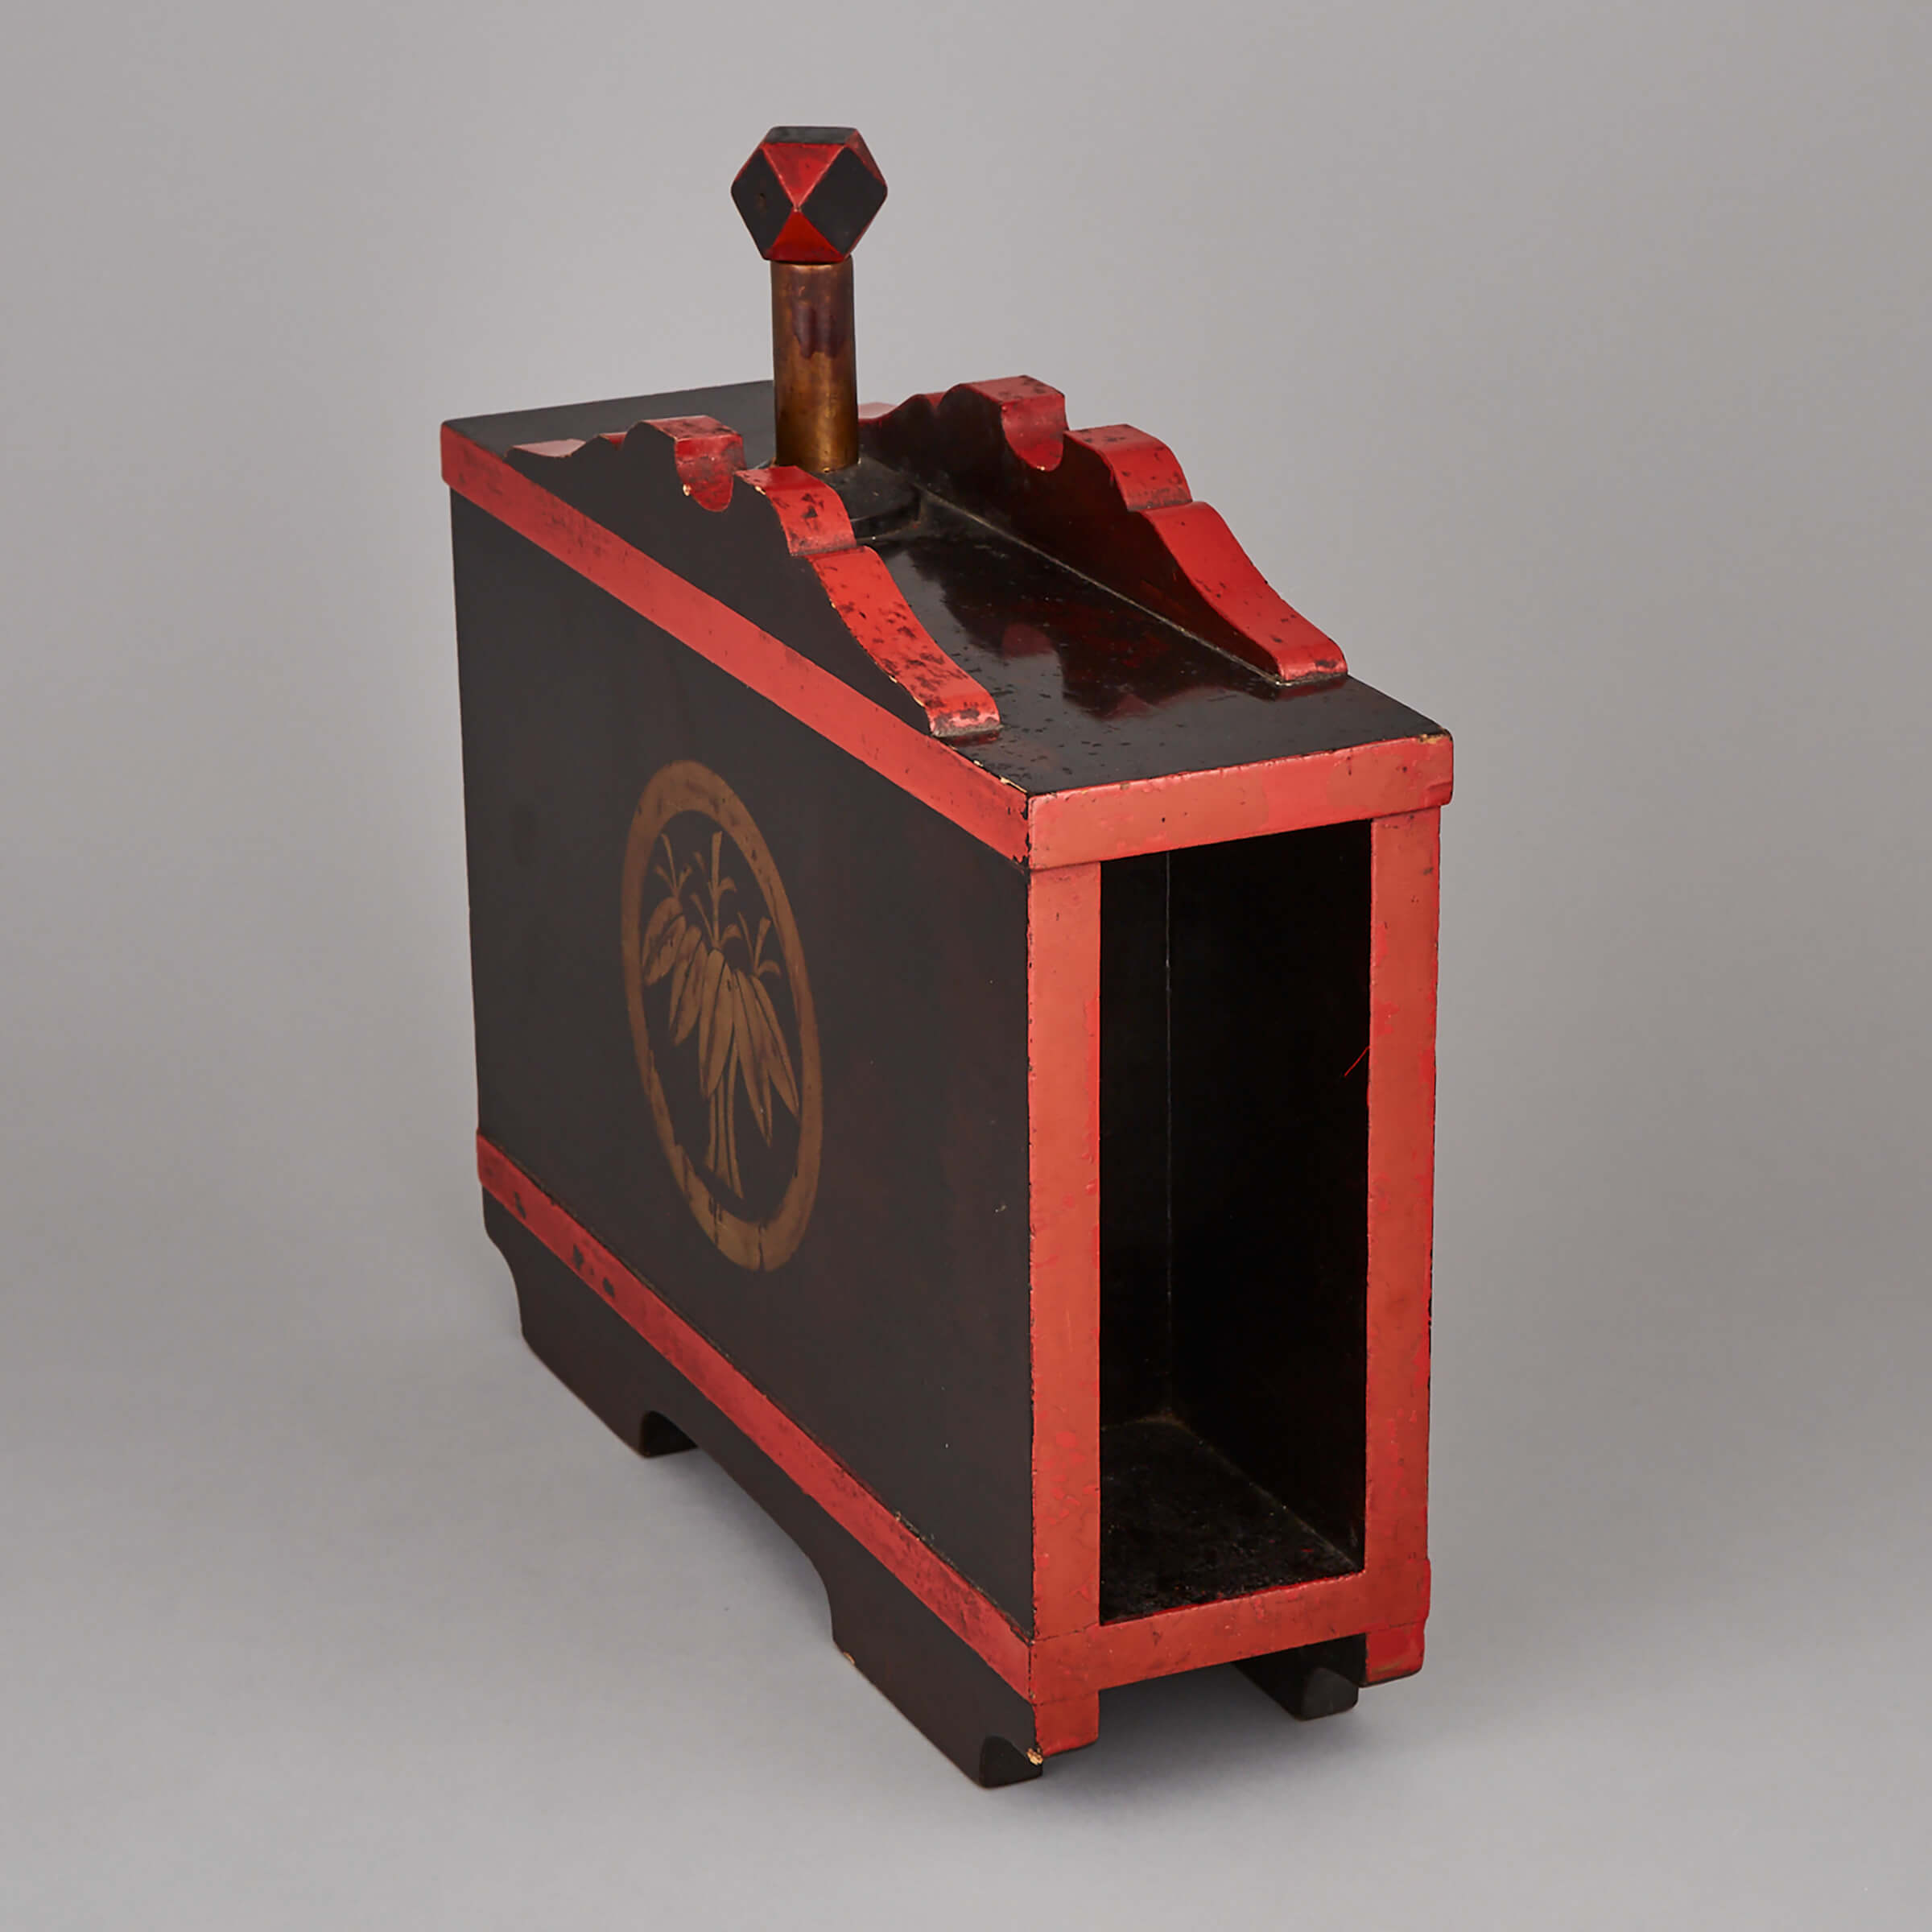 Painted Wood Magician’s Trick Box, mid 20th century